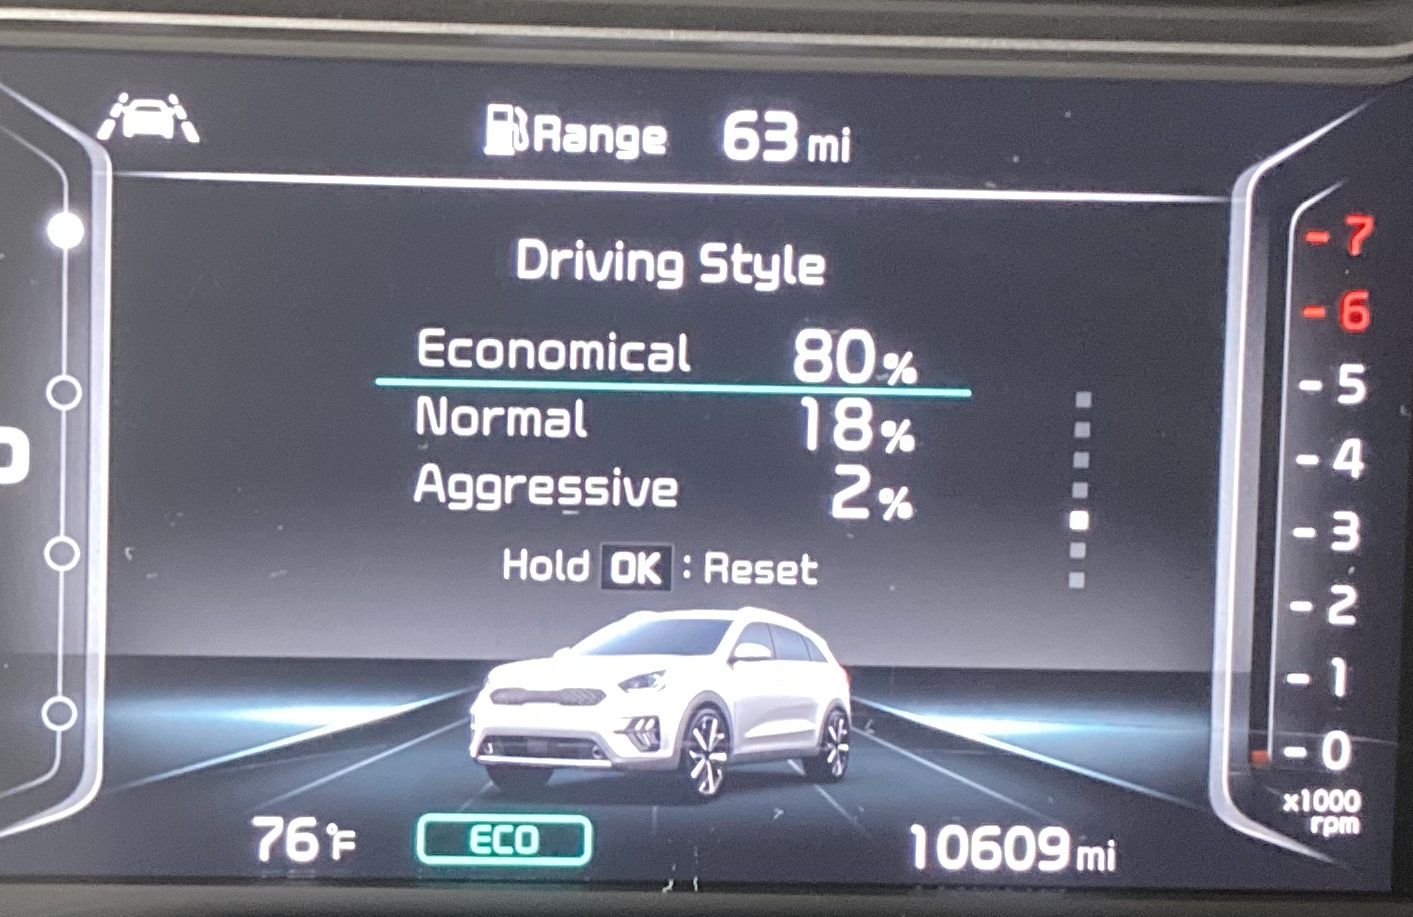 After the long road trip, my calculated driving style was still pretty conservative with 80% economical, 18% normal, and 2% aggressive.